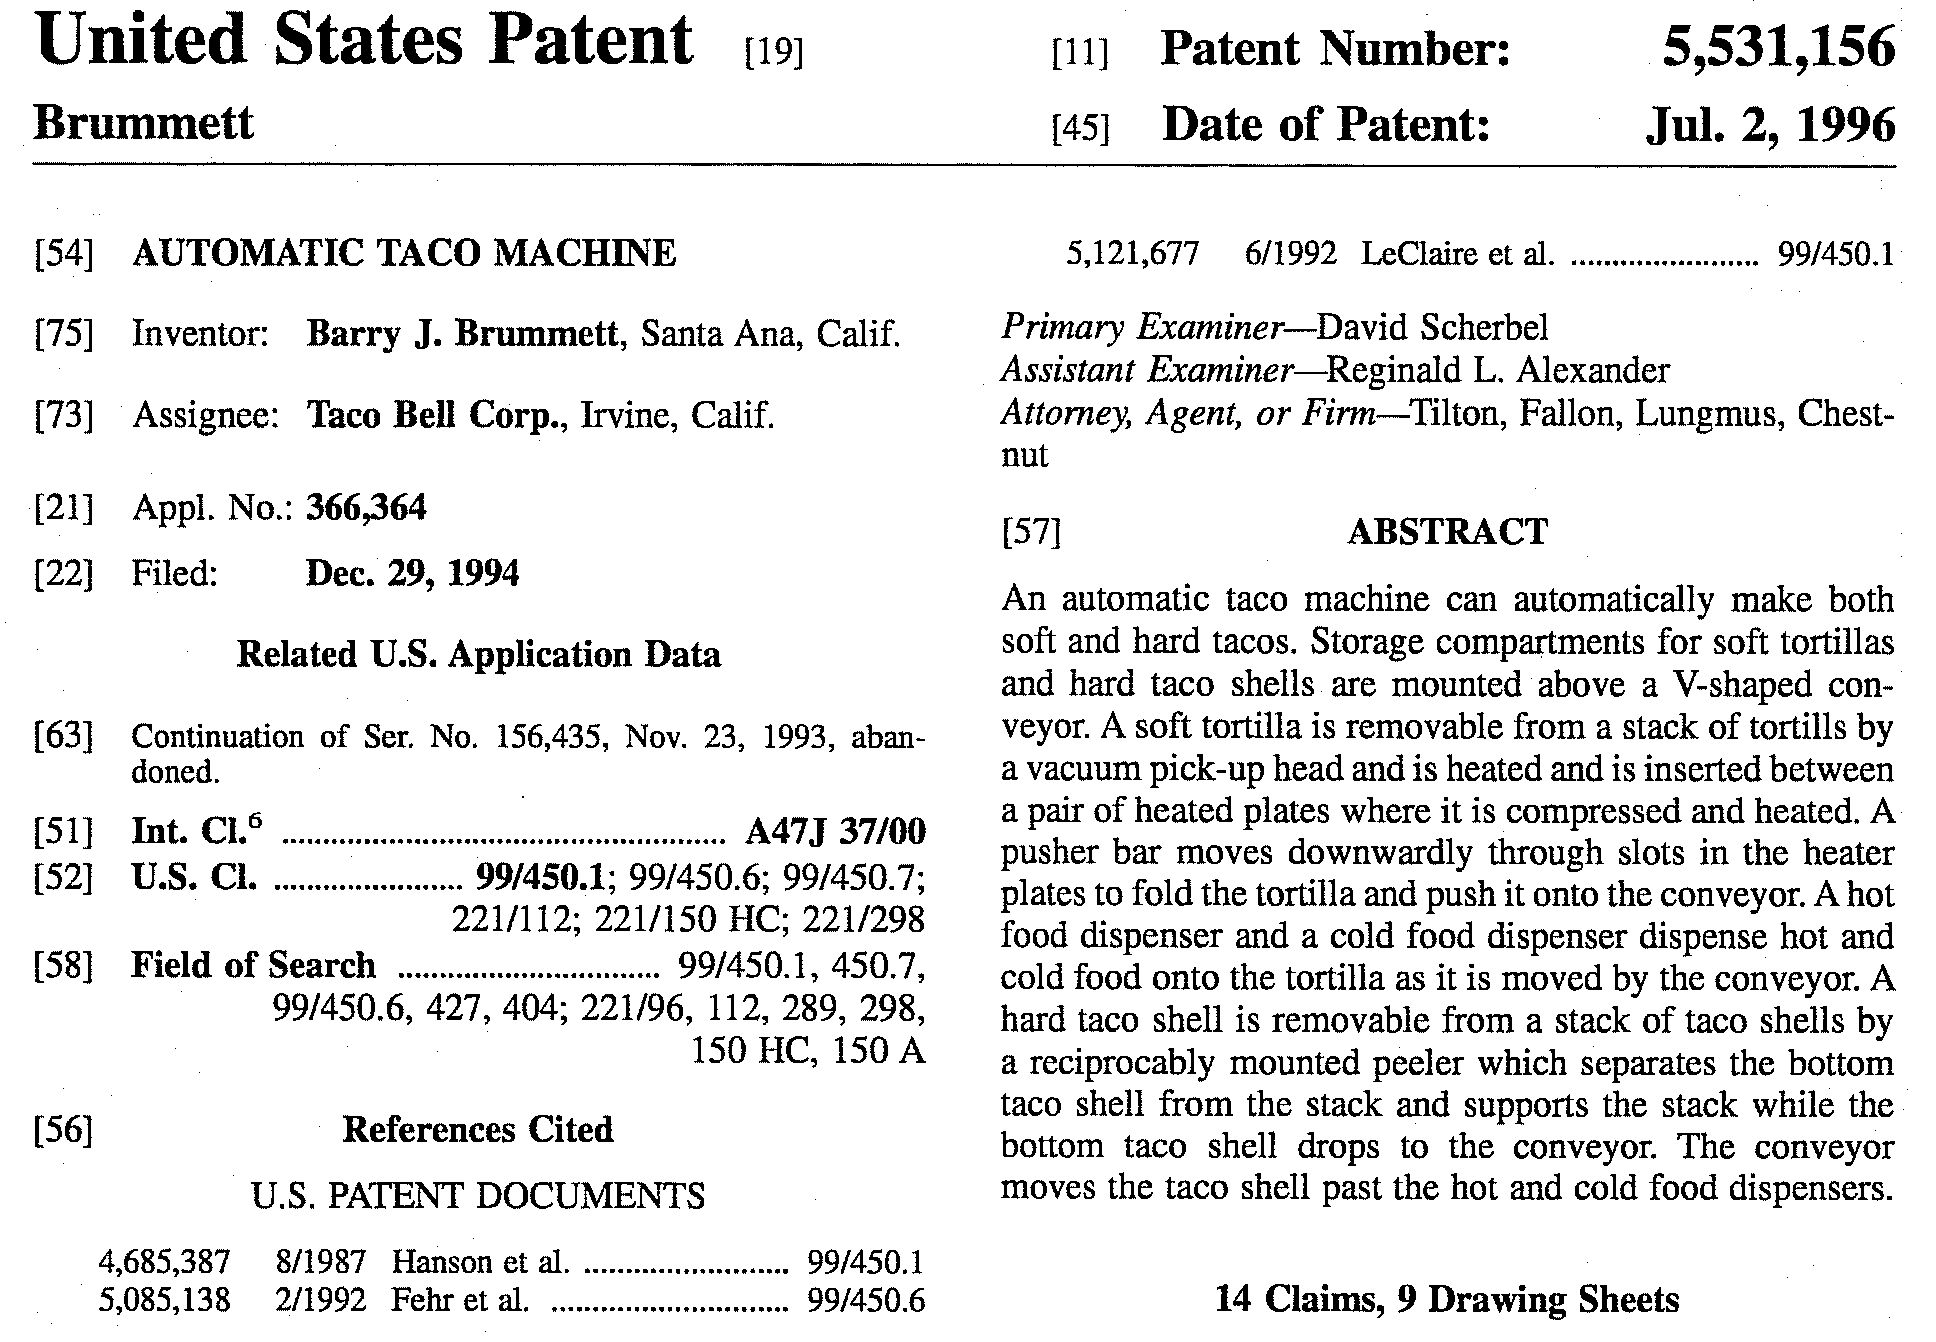 xample of a patent document: The Automatic Taco Machine from 1996